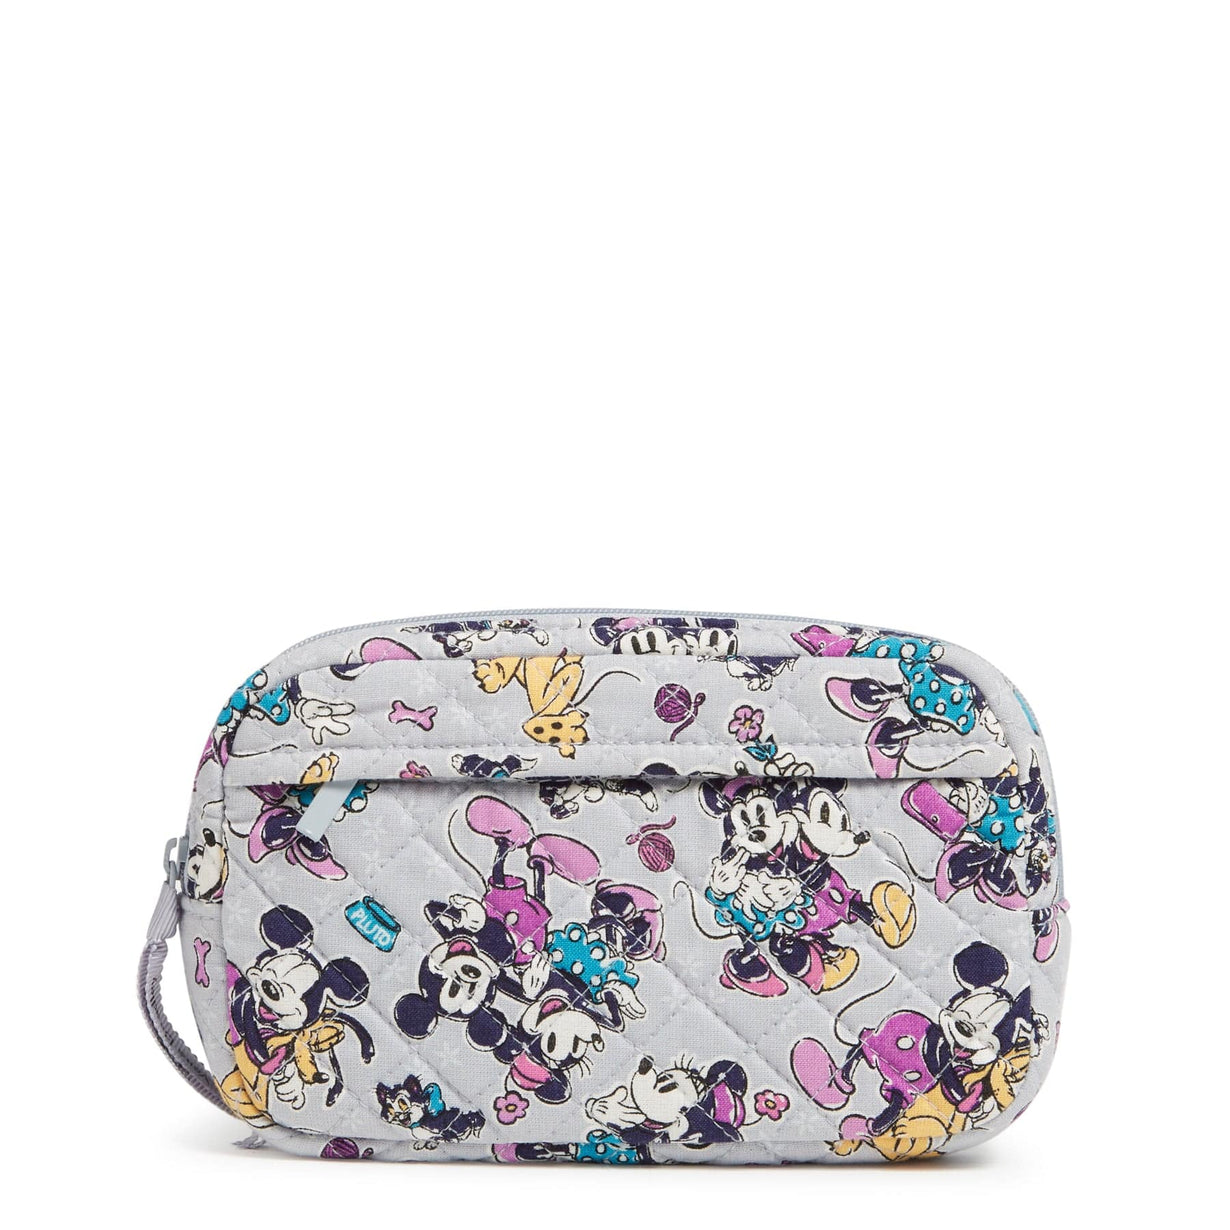 Minnie Mouse Garden Party Triple Compartment Crossbody Bag by Vera Bradley  | Disney Store